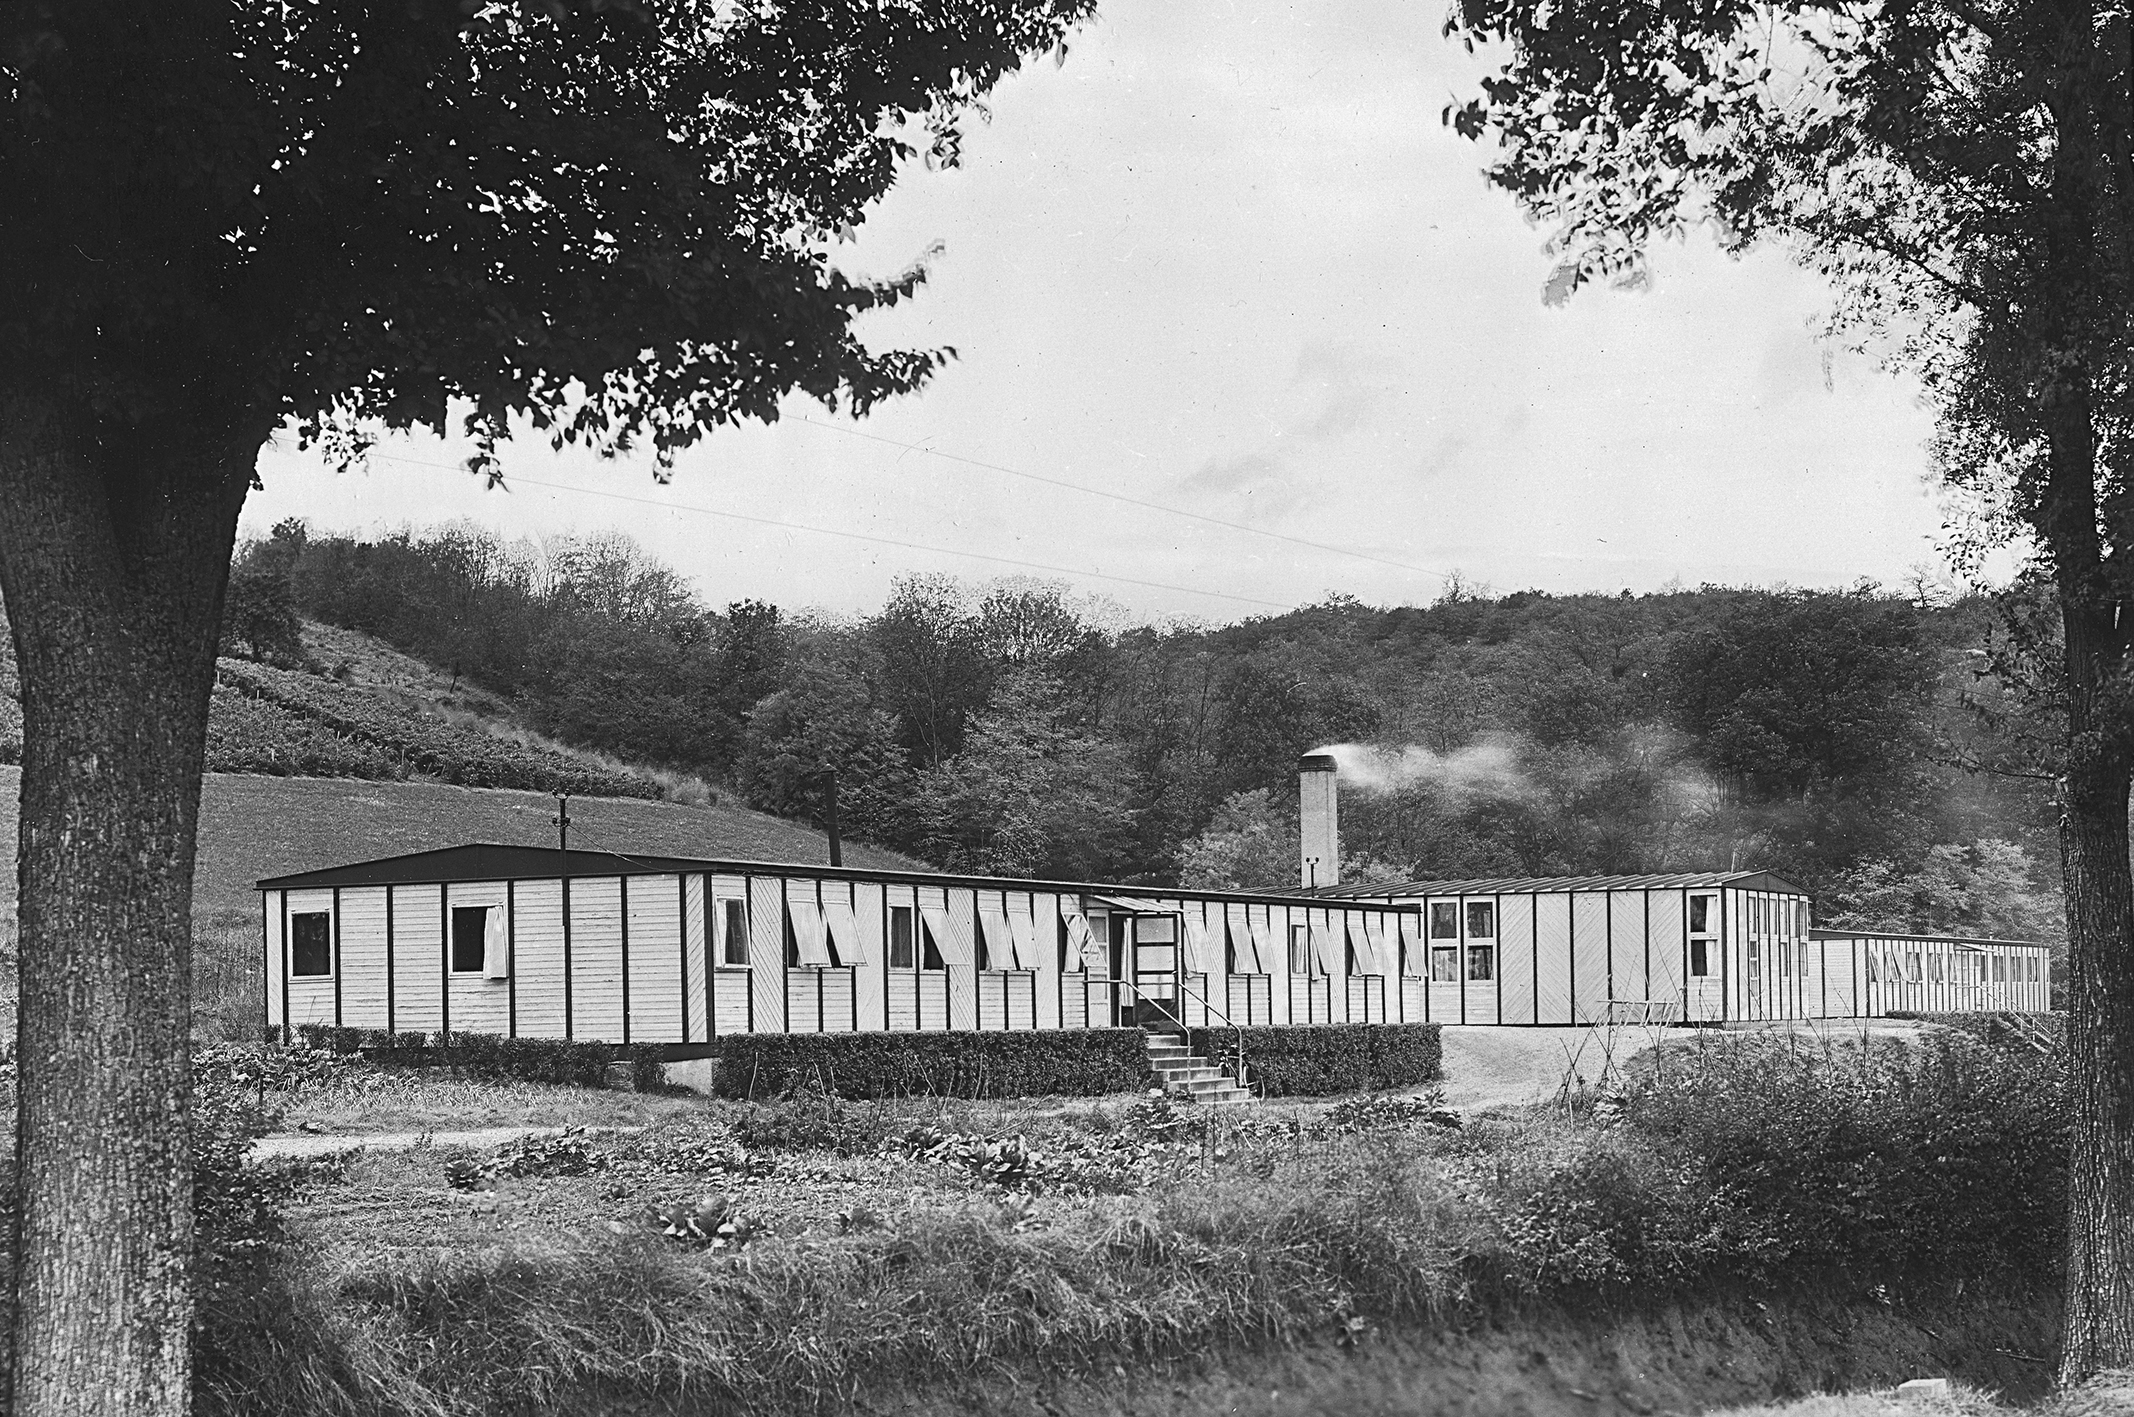 SCAL demountable pavilions. Construction system Jean Prouvé, Pierre Jeanneret, architect. Two buildings of accommodation for the engineers, flanking the “clubhouse” serving as refectory and meeting room, Issoire, 1940–1941.